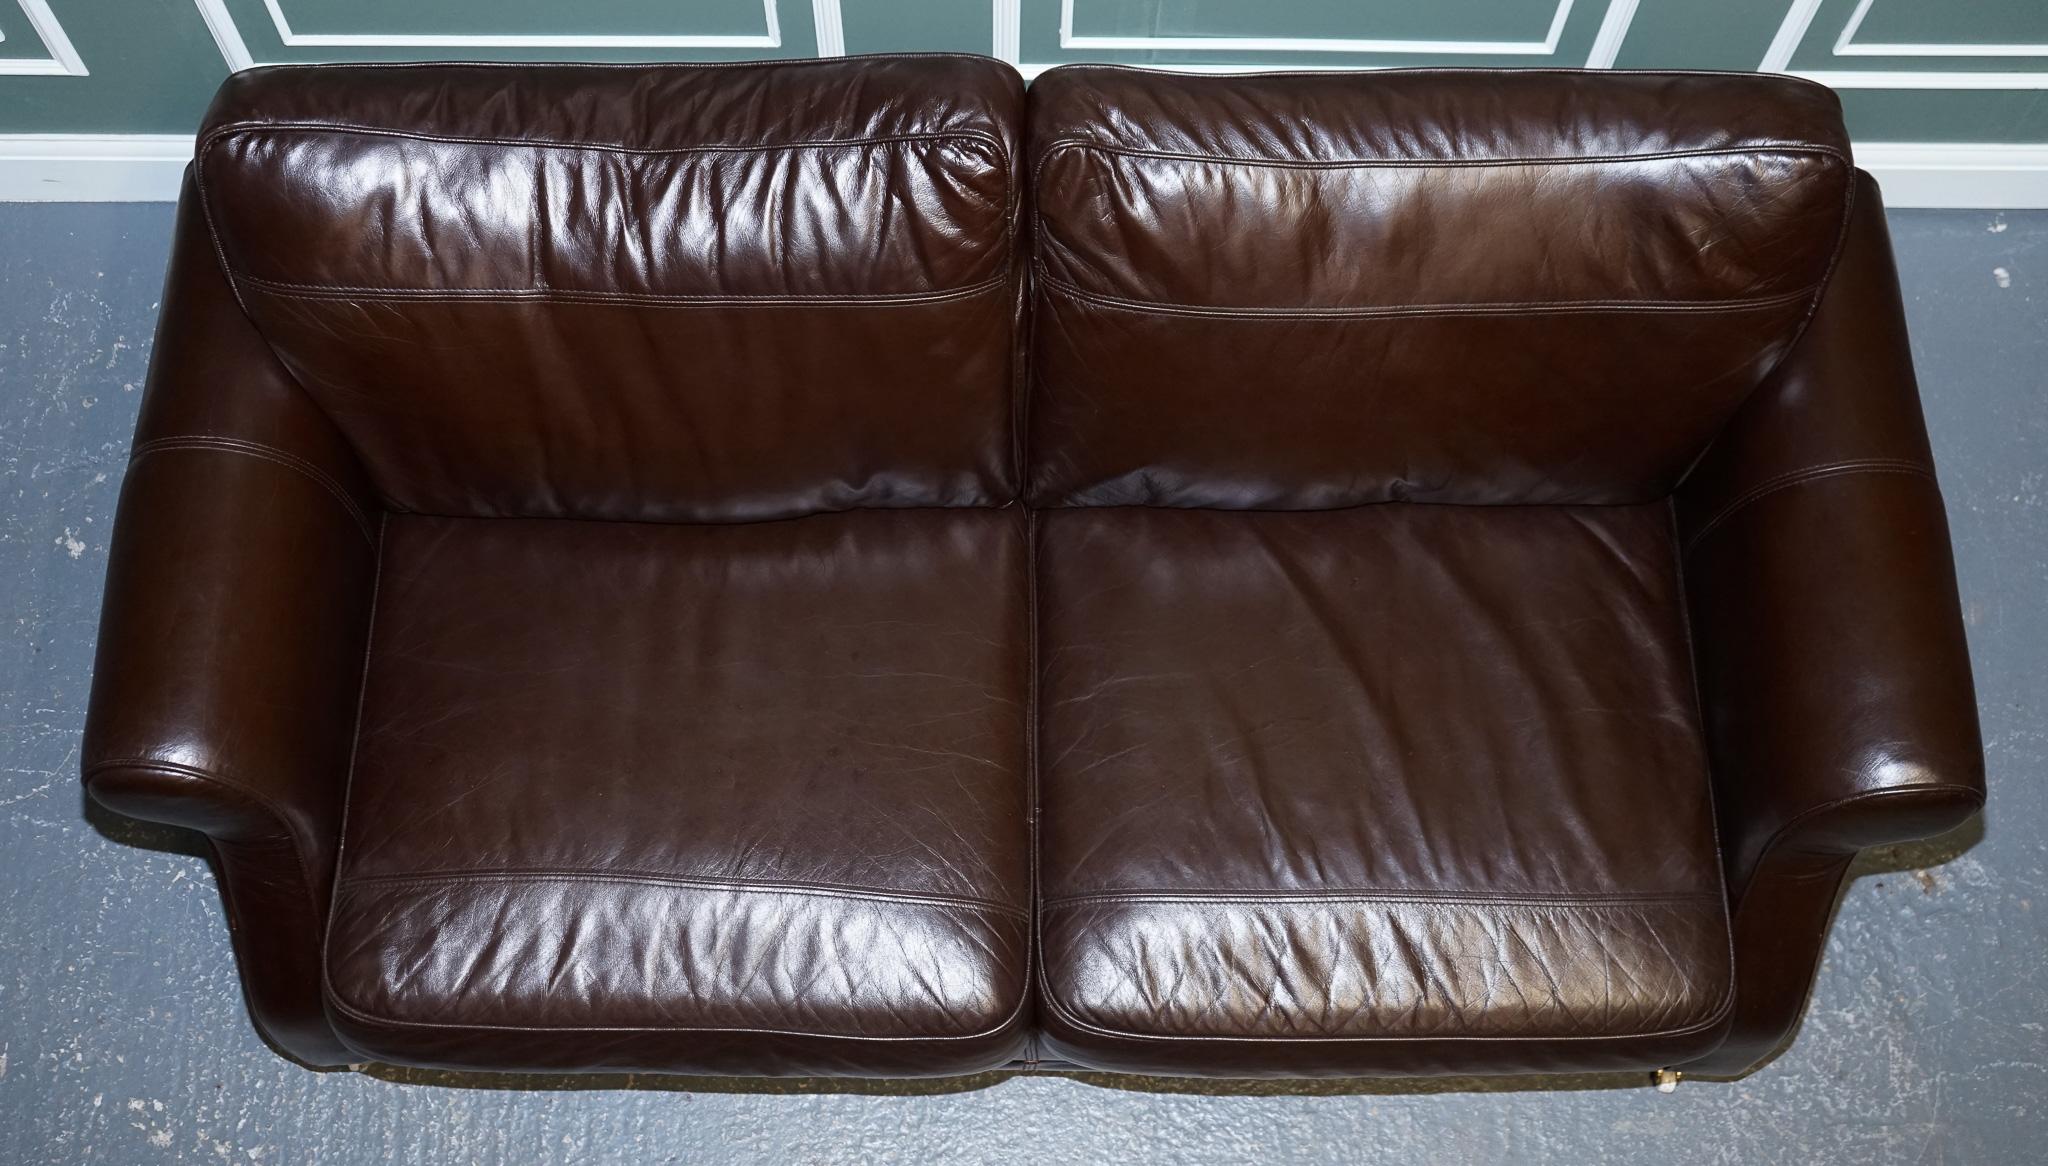 20th Century VINTAGE STUNNiNG CHOCOLATE BROWN LEATHER 2 TO 3 SEATER SOFA For Sale